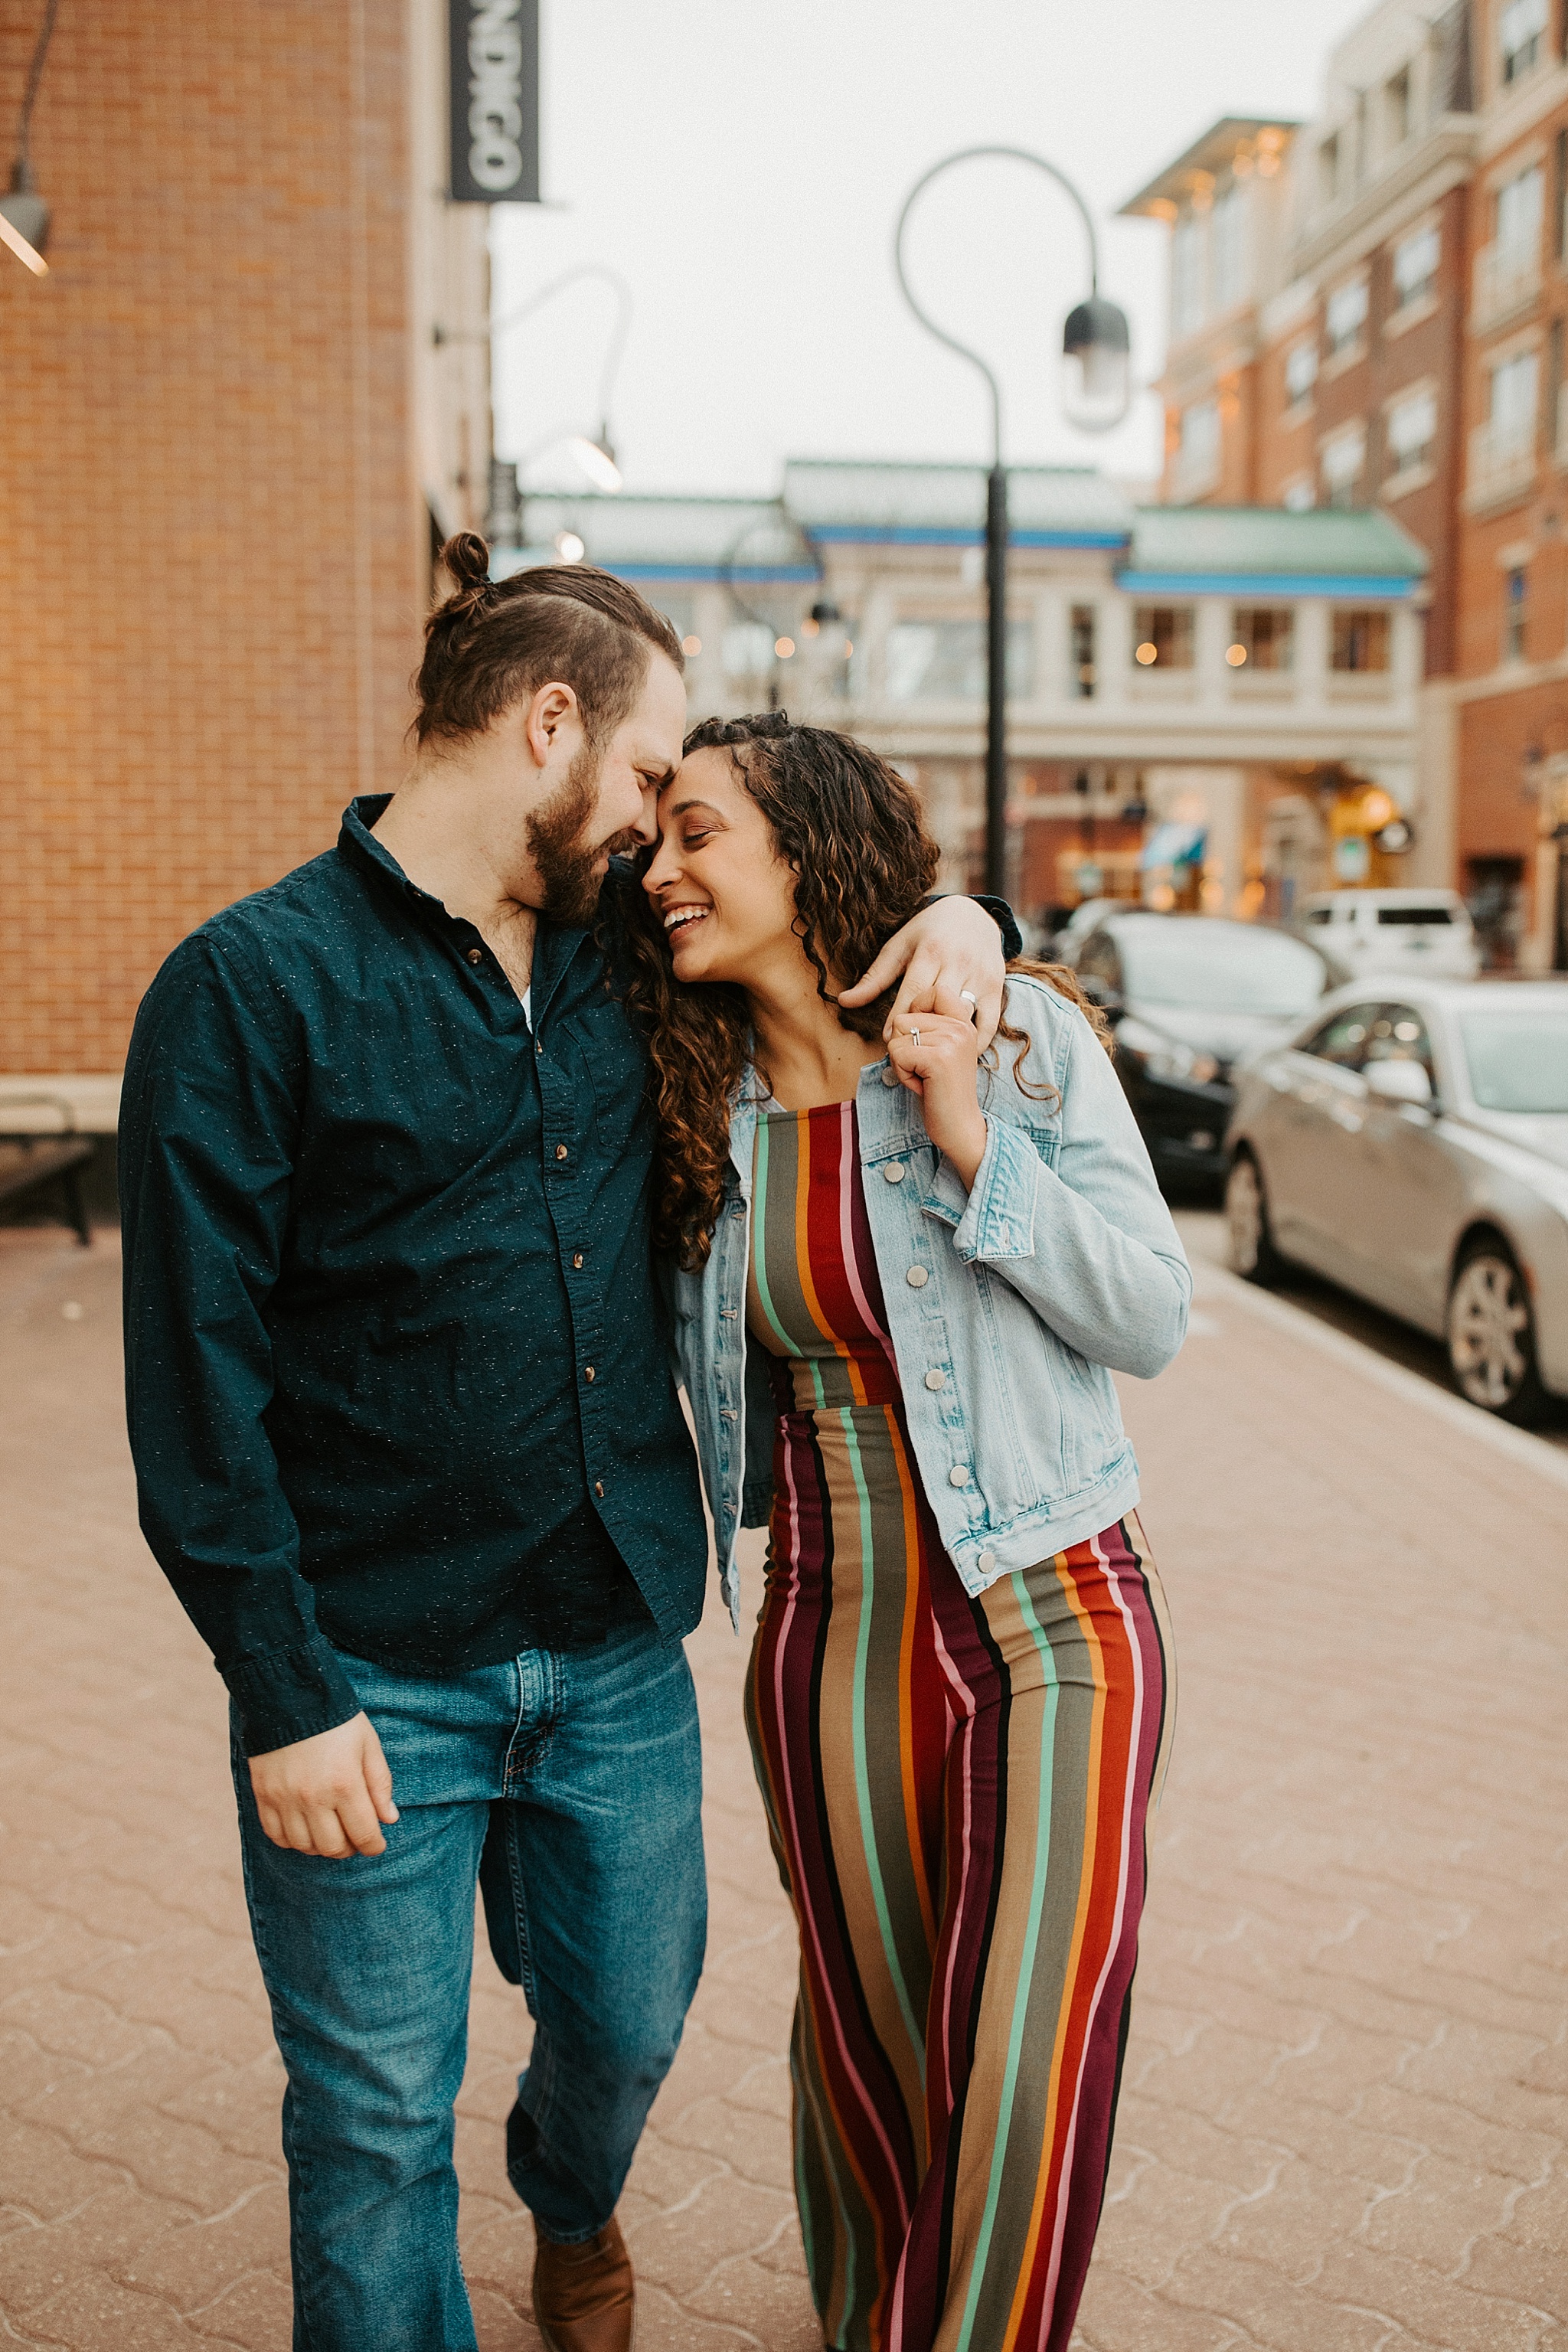 fun couples session along the riverwalk in Naperville, IL. Krystal Richmond Photography